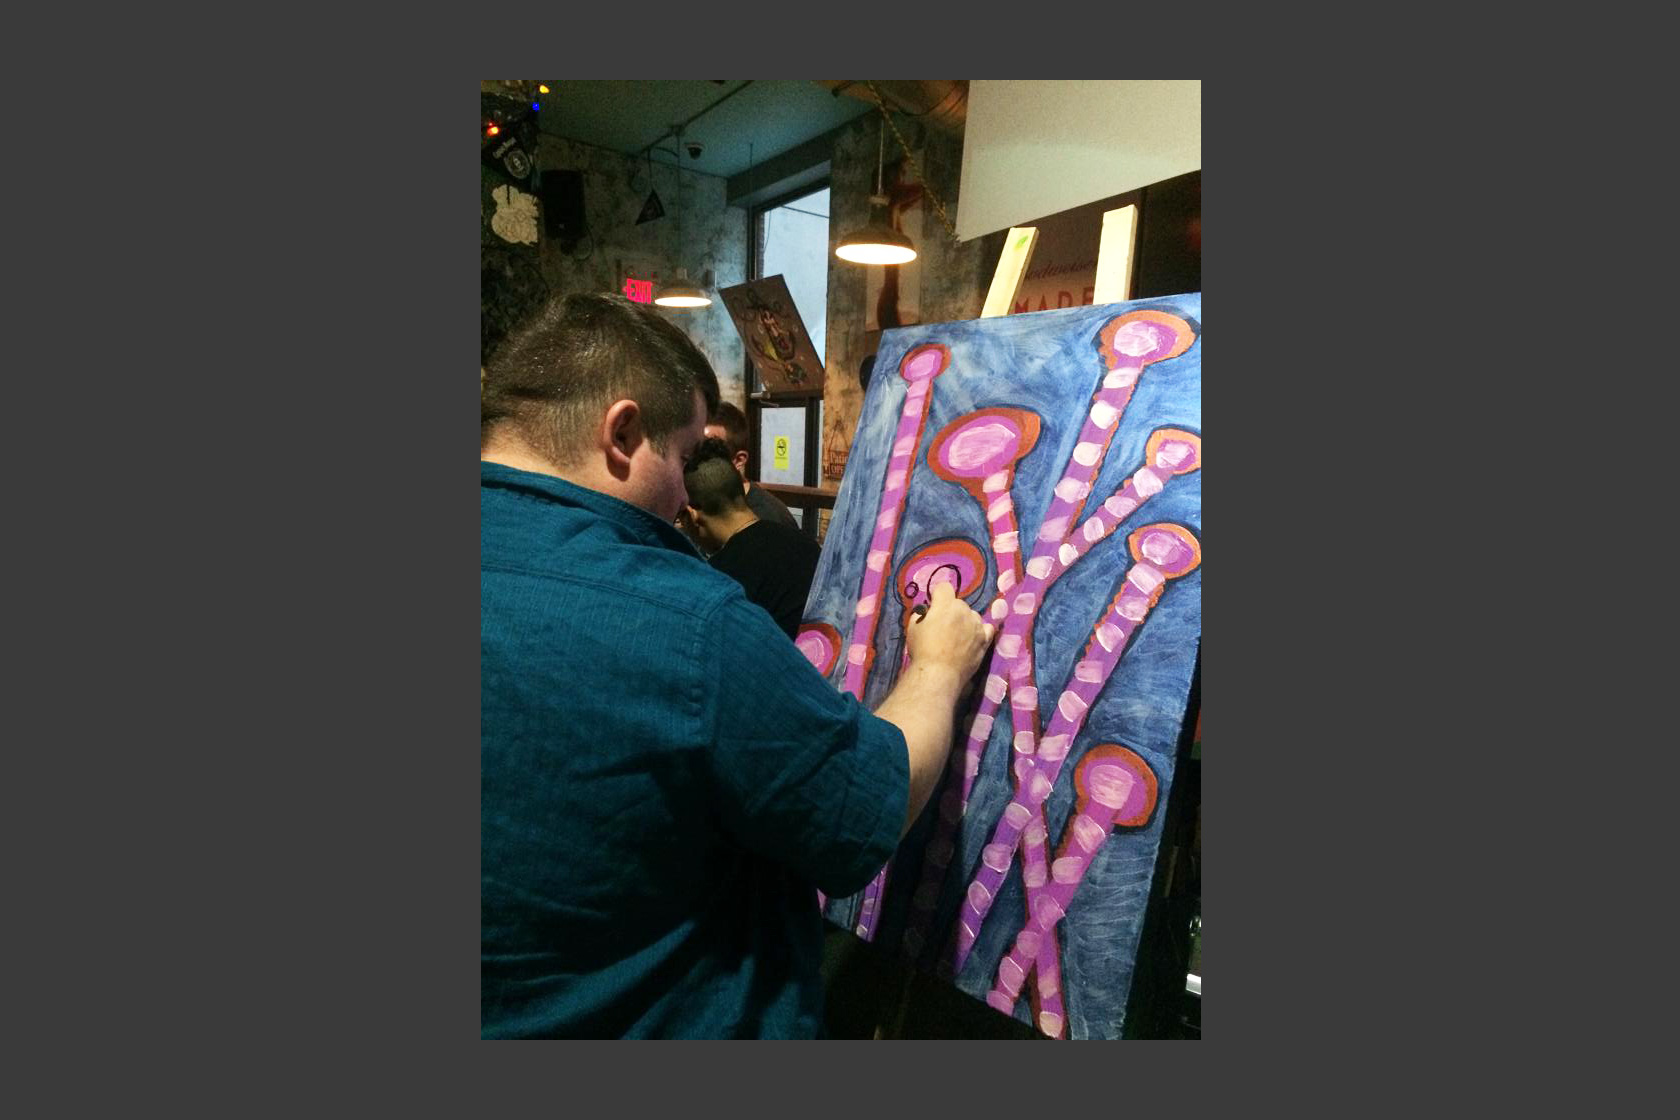 Live Painting Performance, Pacific Junction Hotel, June 6 2015